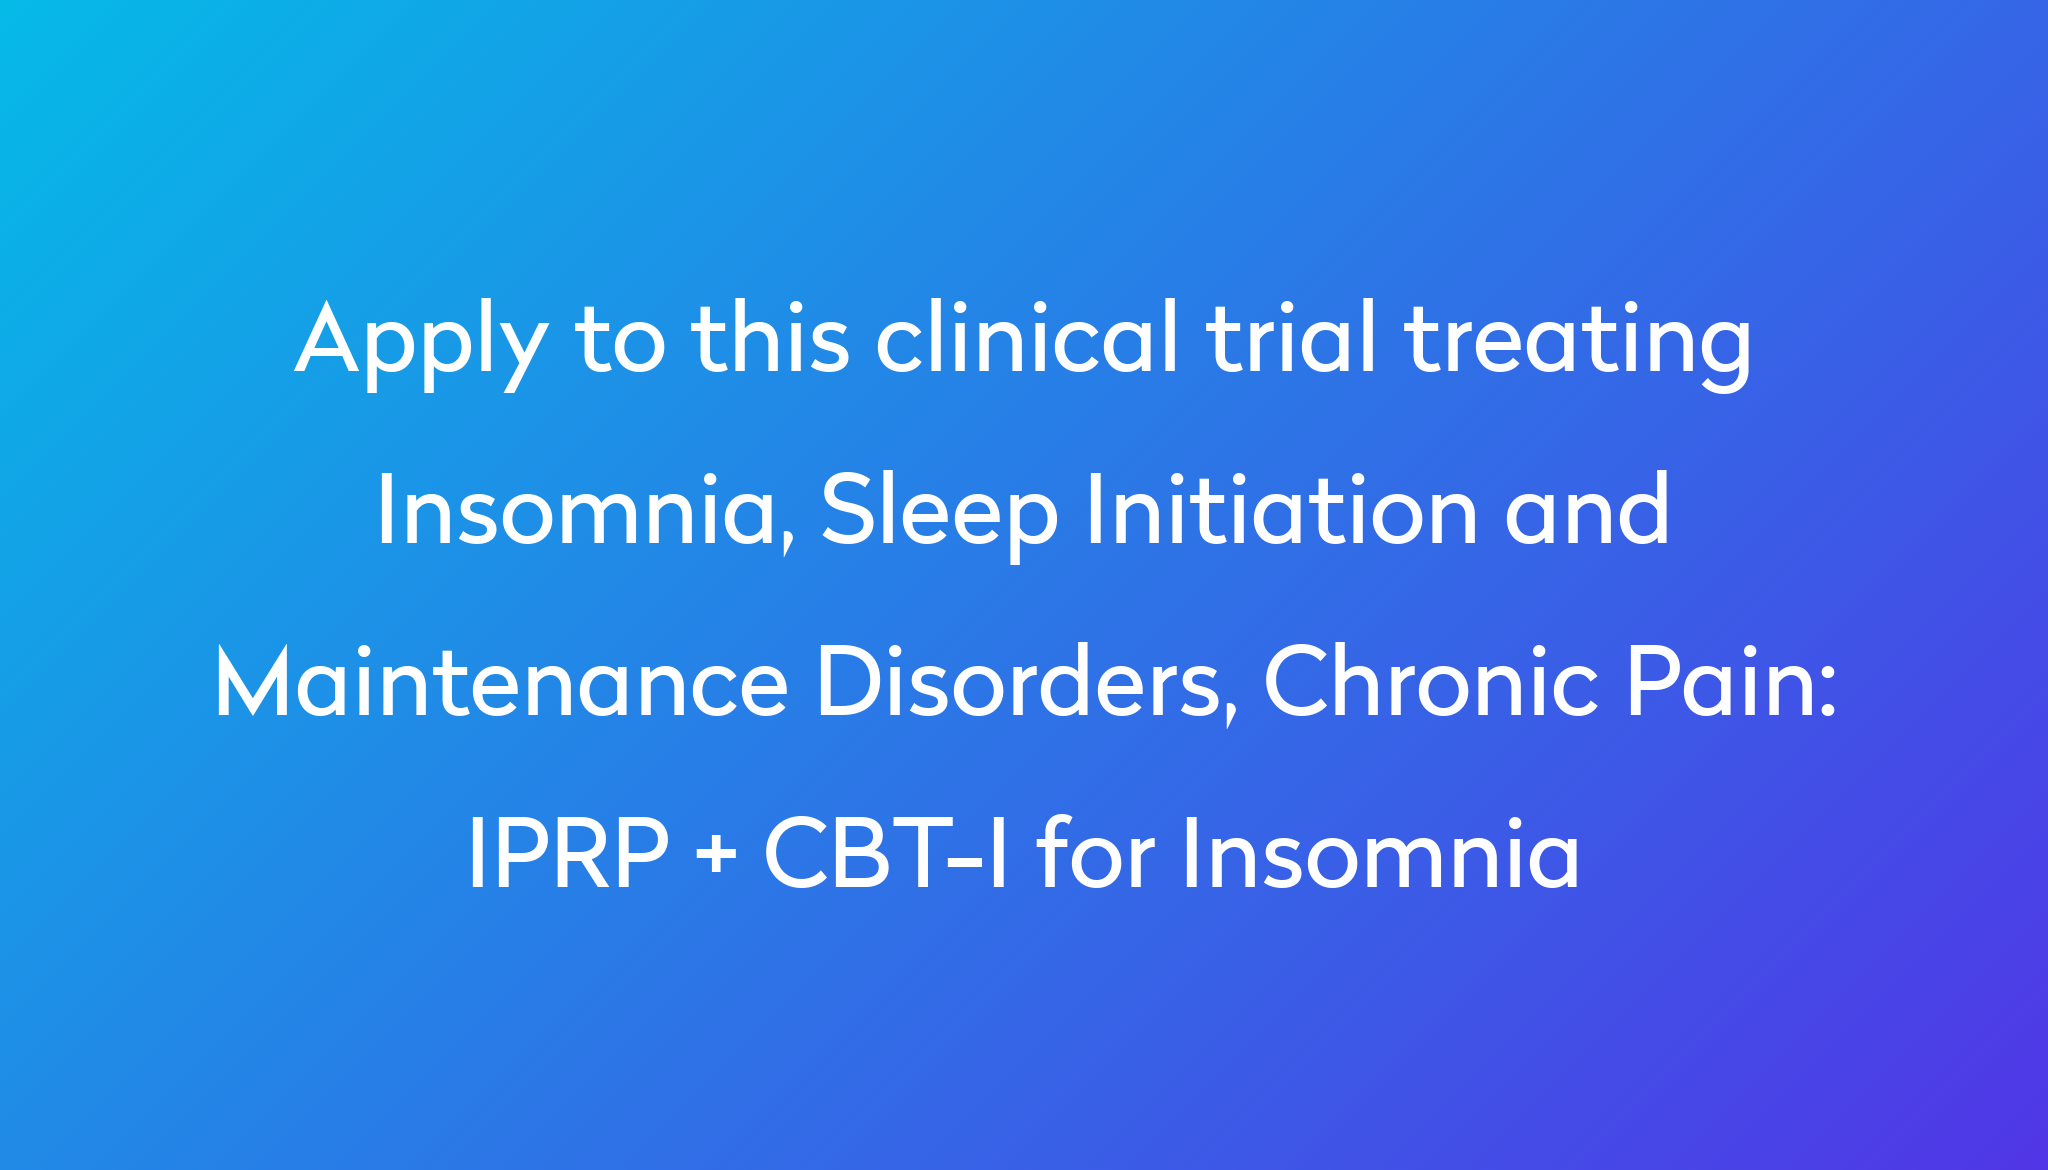 iprp-cbt-i-for-insomnia-clinical-trial-2022-power